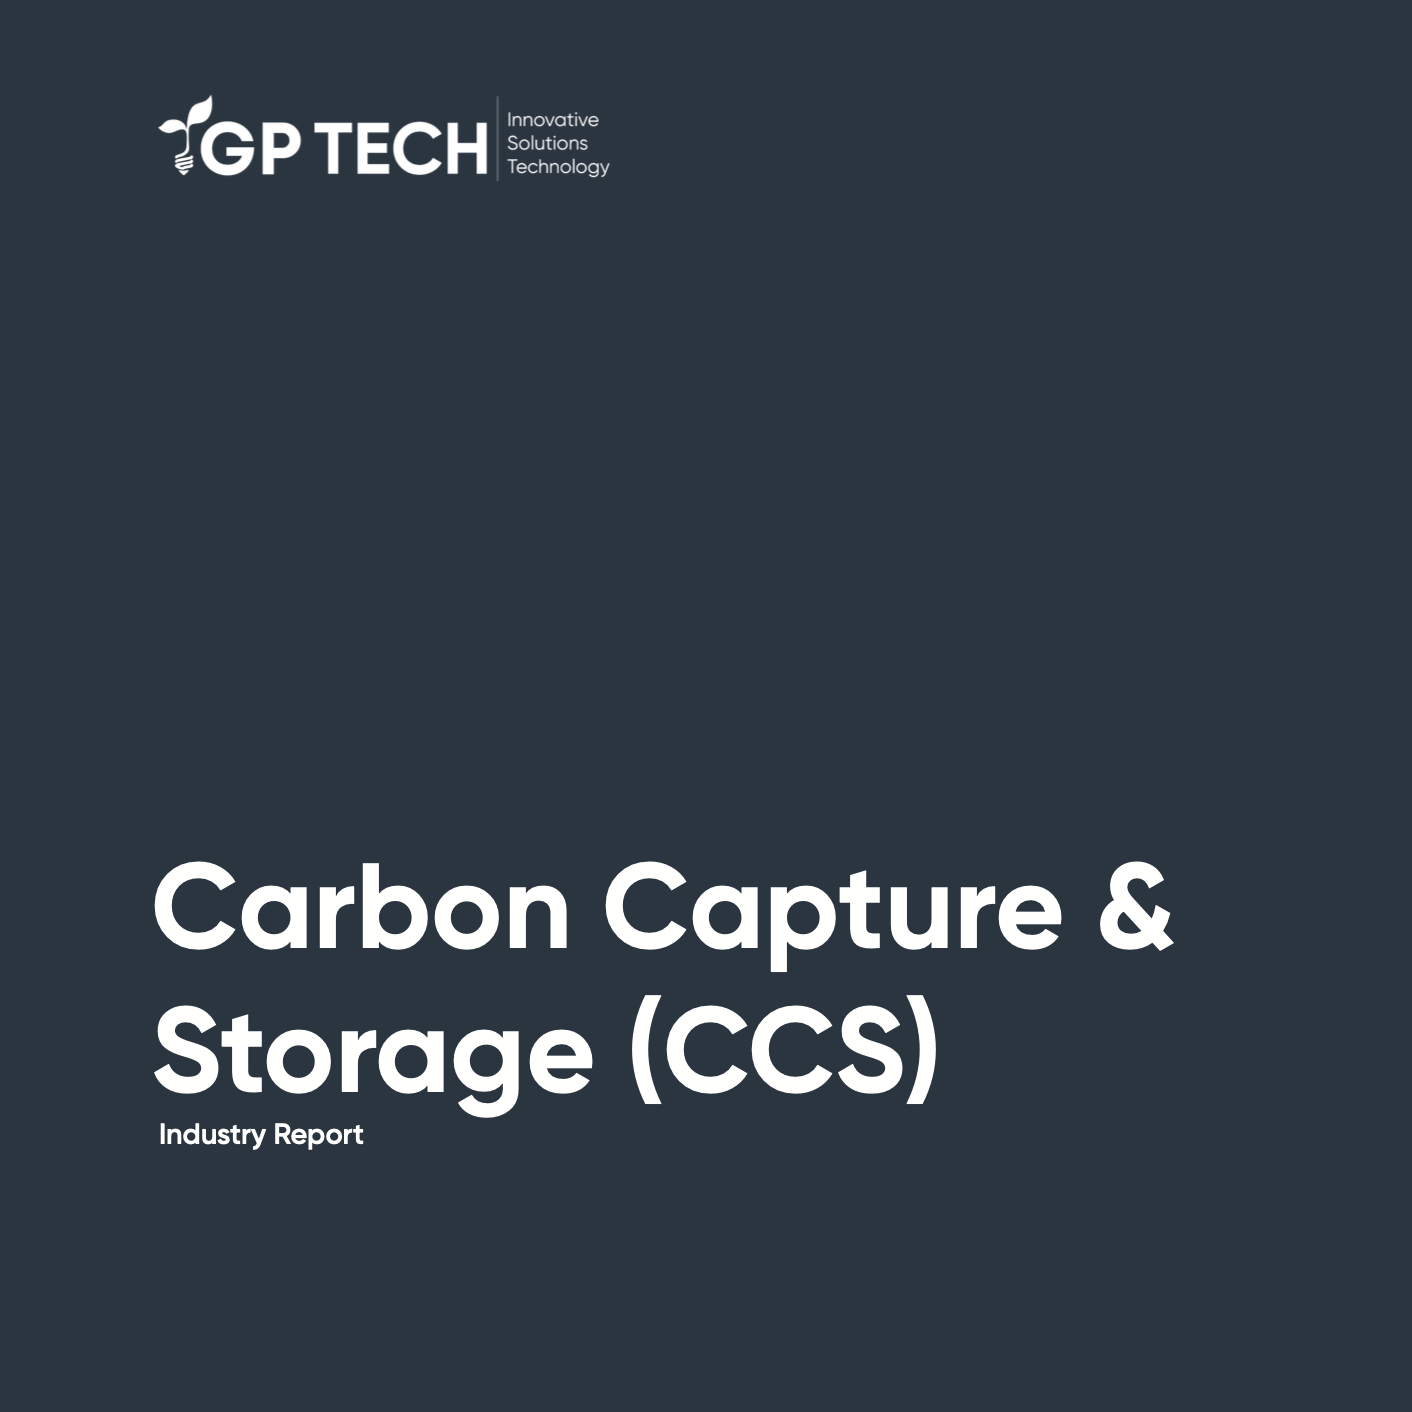 Carbon Capture and Storage as a solution